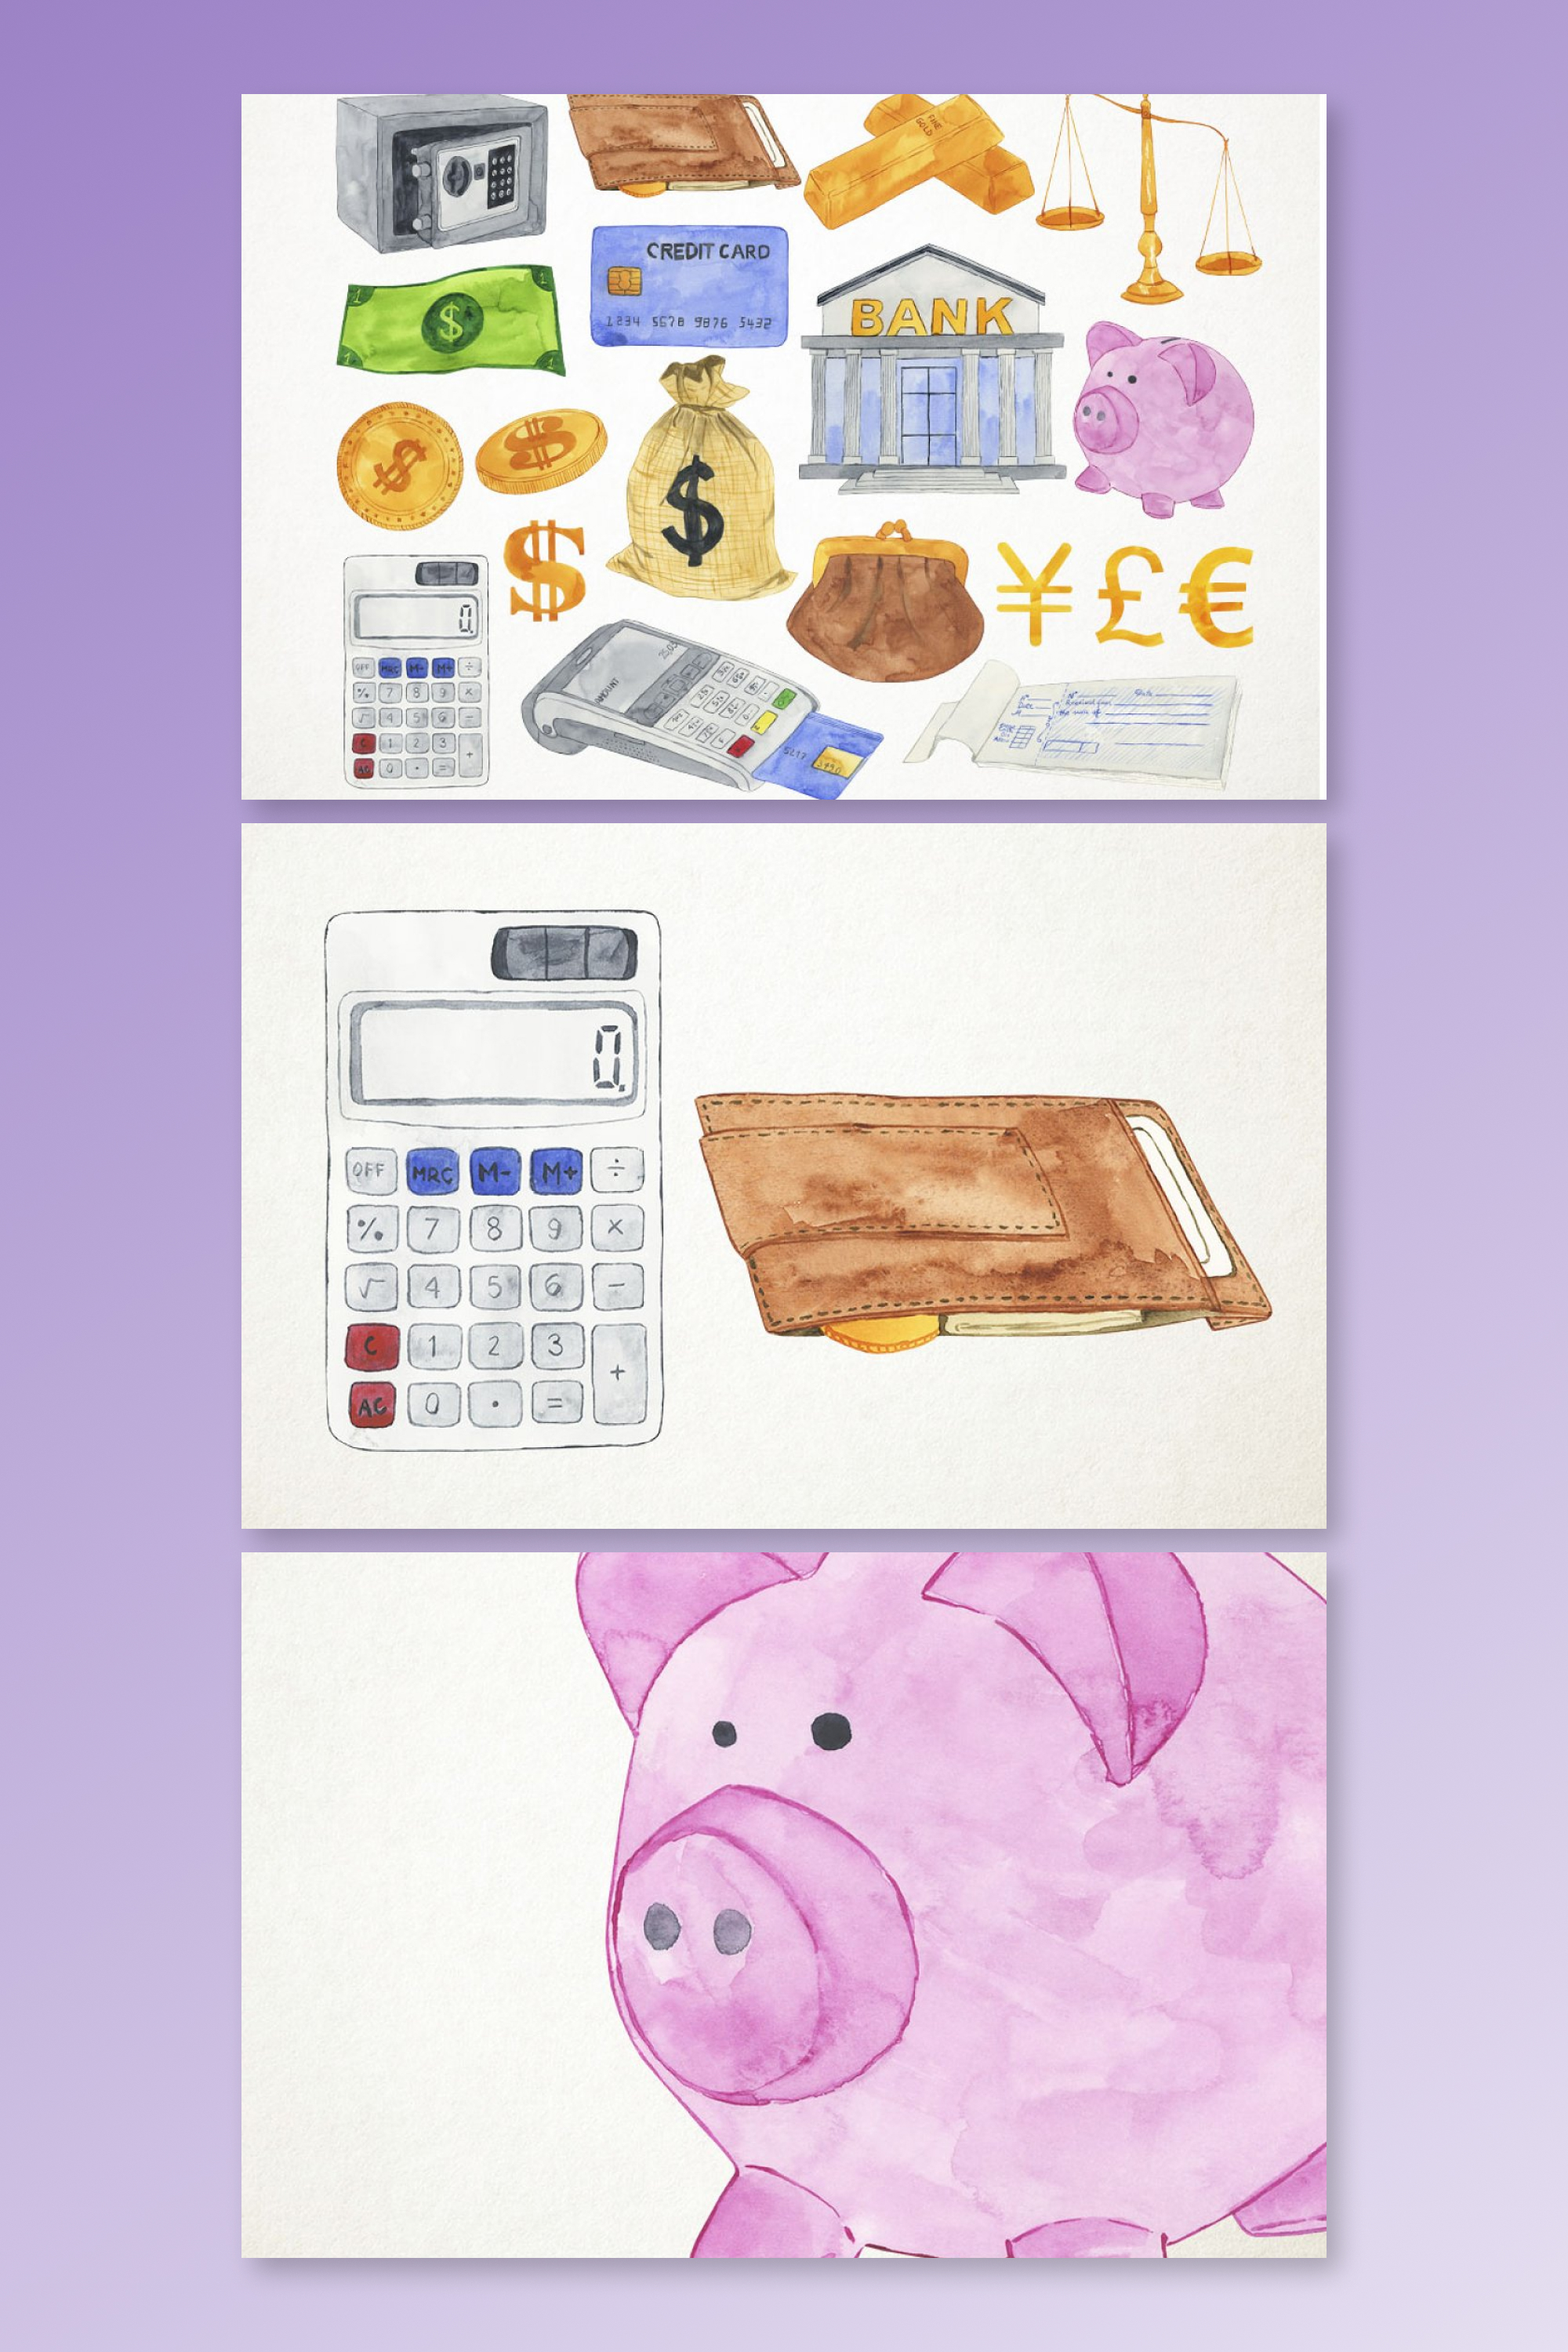 Cool financial pictures for your work.